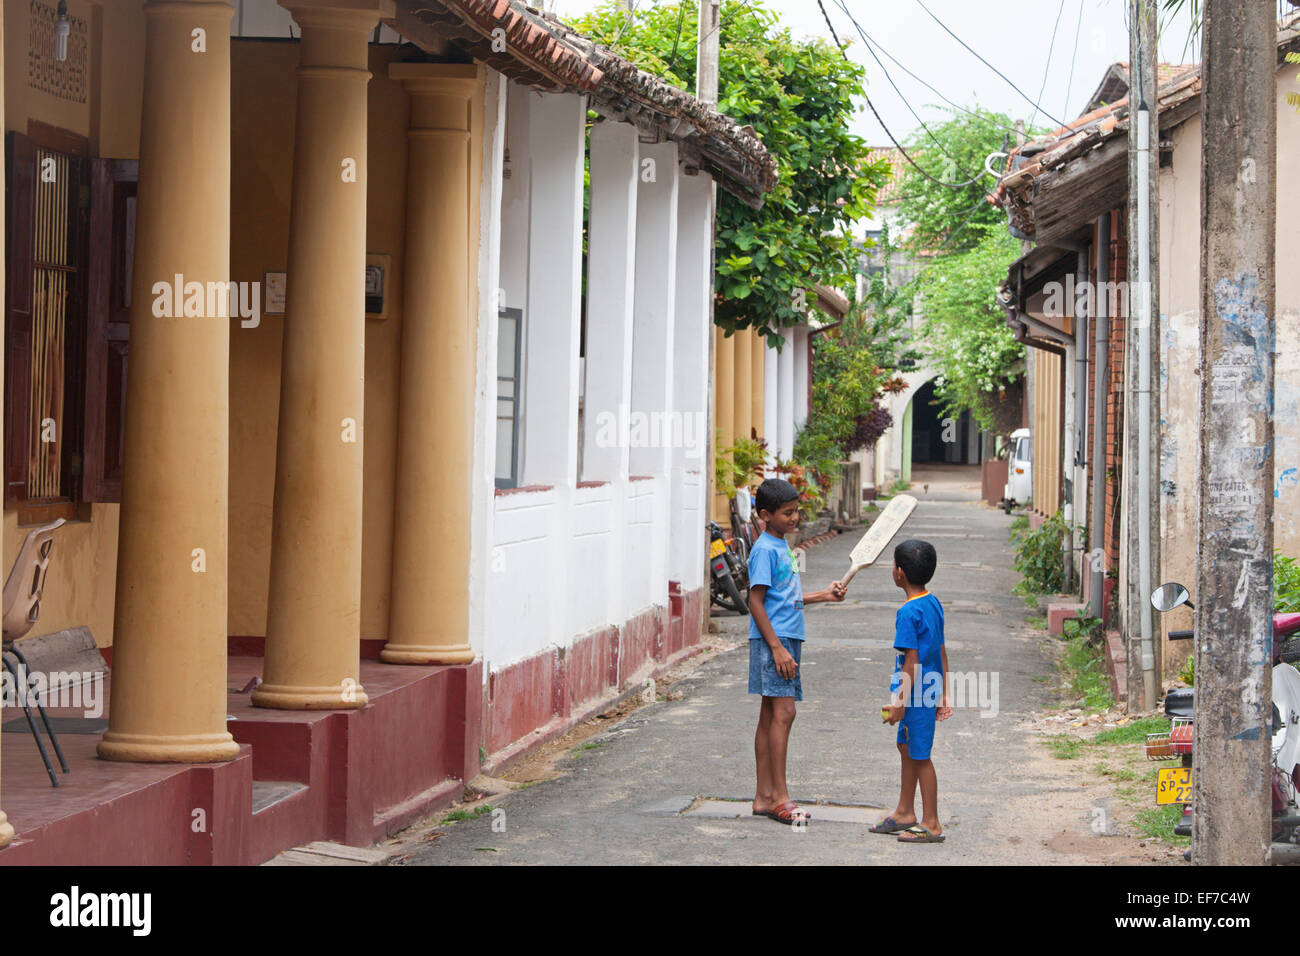 BOYS PLAYING CRICKET IN COLONIAL STREET IN GALLE FORT Stock Photo